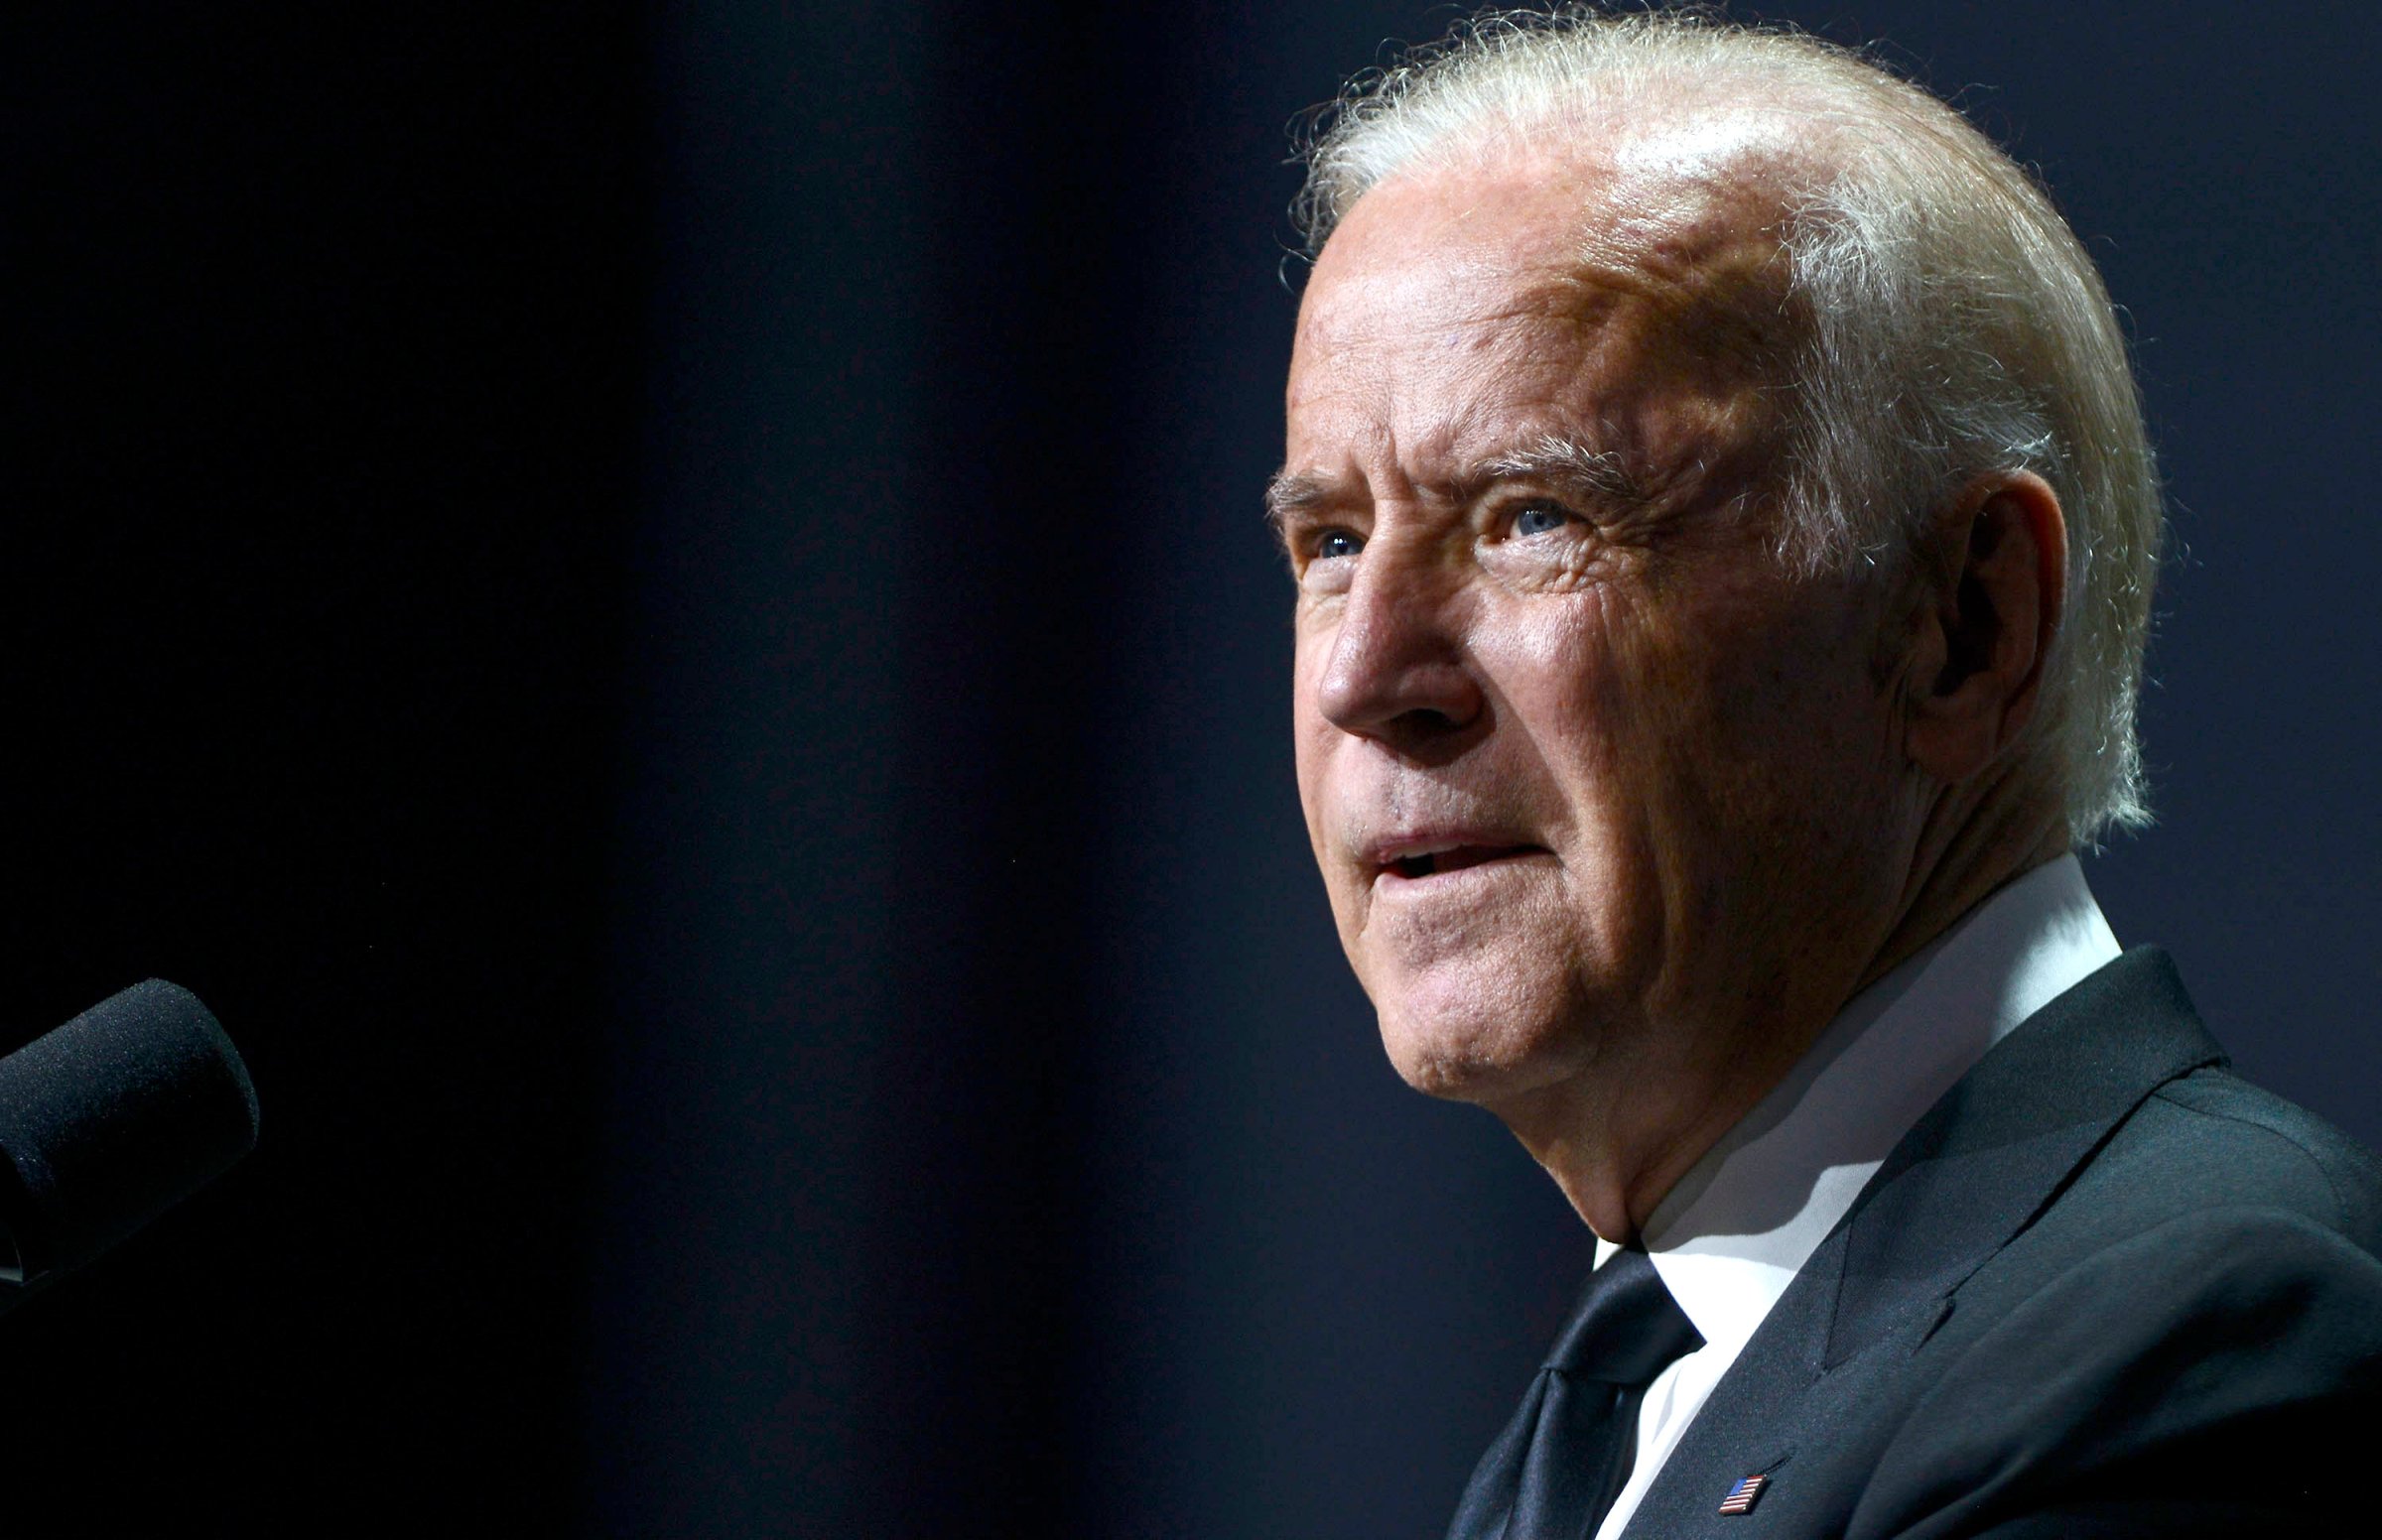 Vice President Joe Biden speaks during the 19th Annual HRC National Dinner at Walter E. Washington Convention Center on October 3, 2015 in Washington, DC.